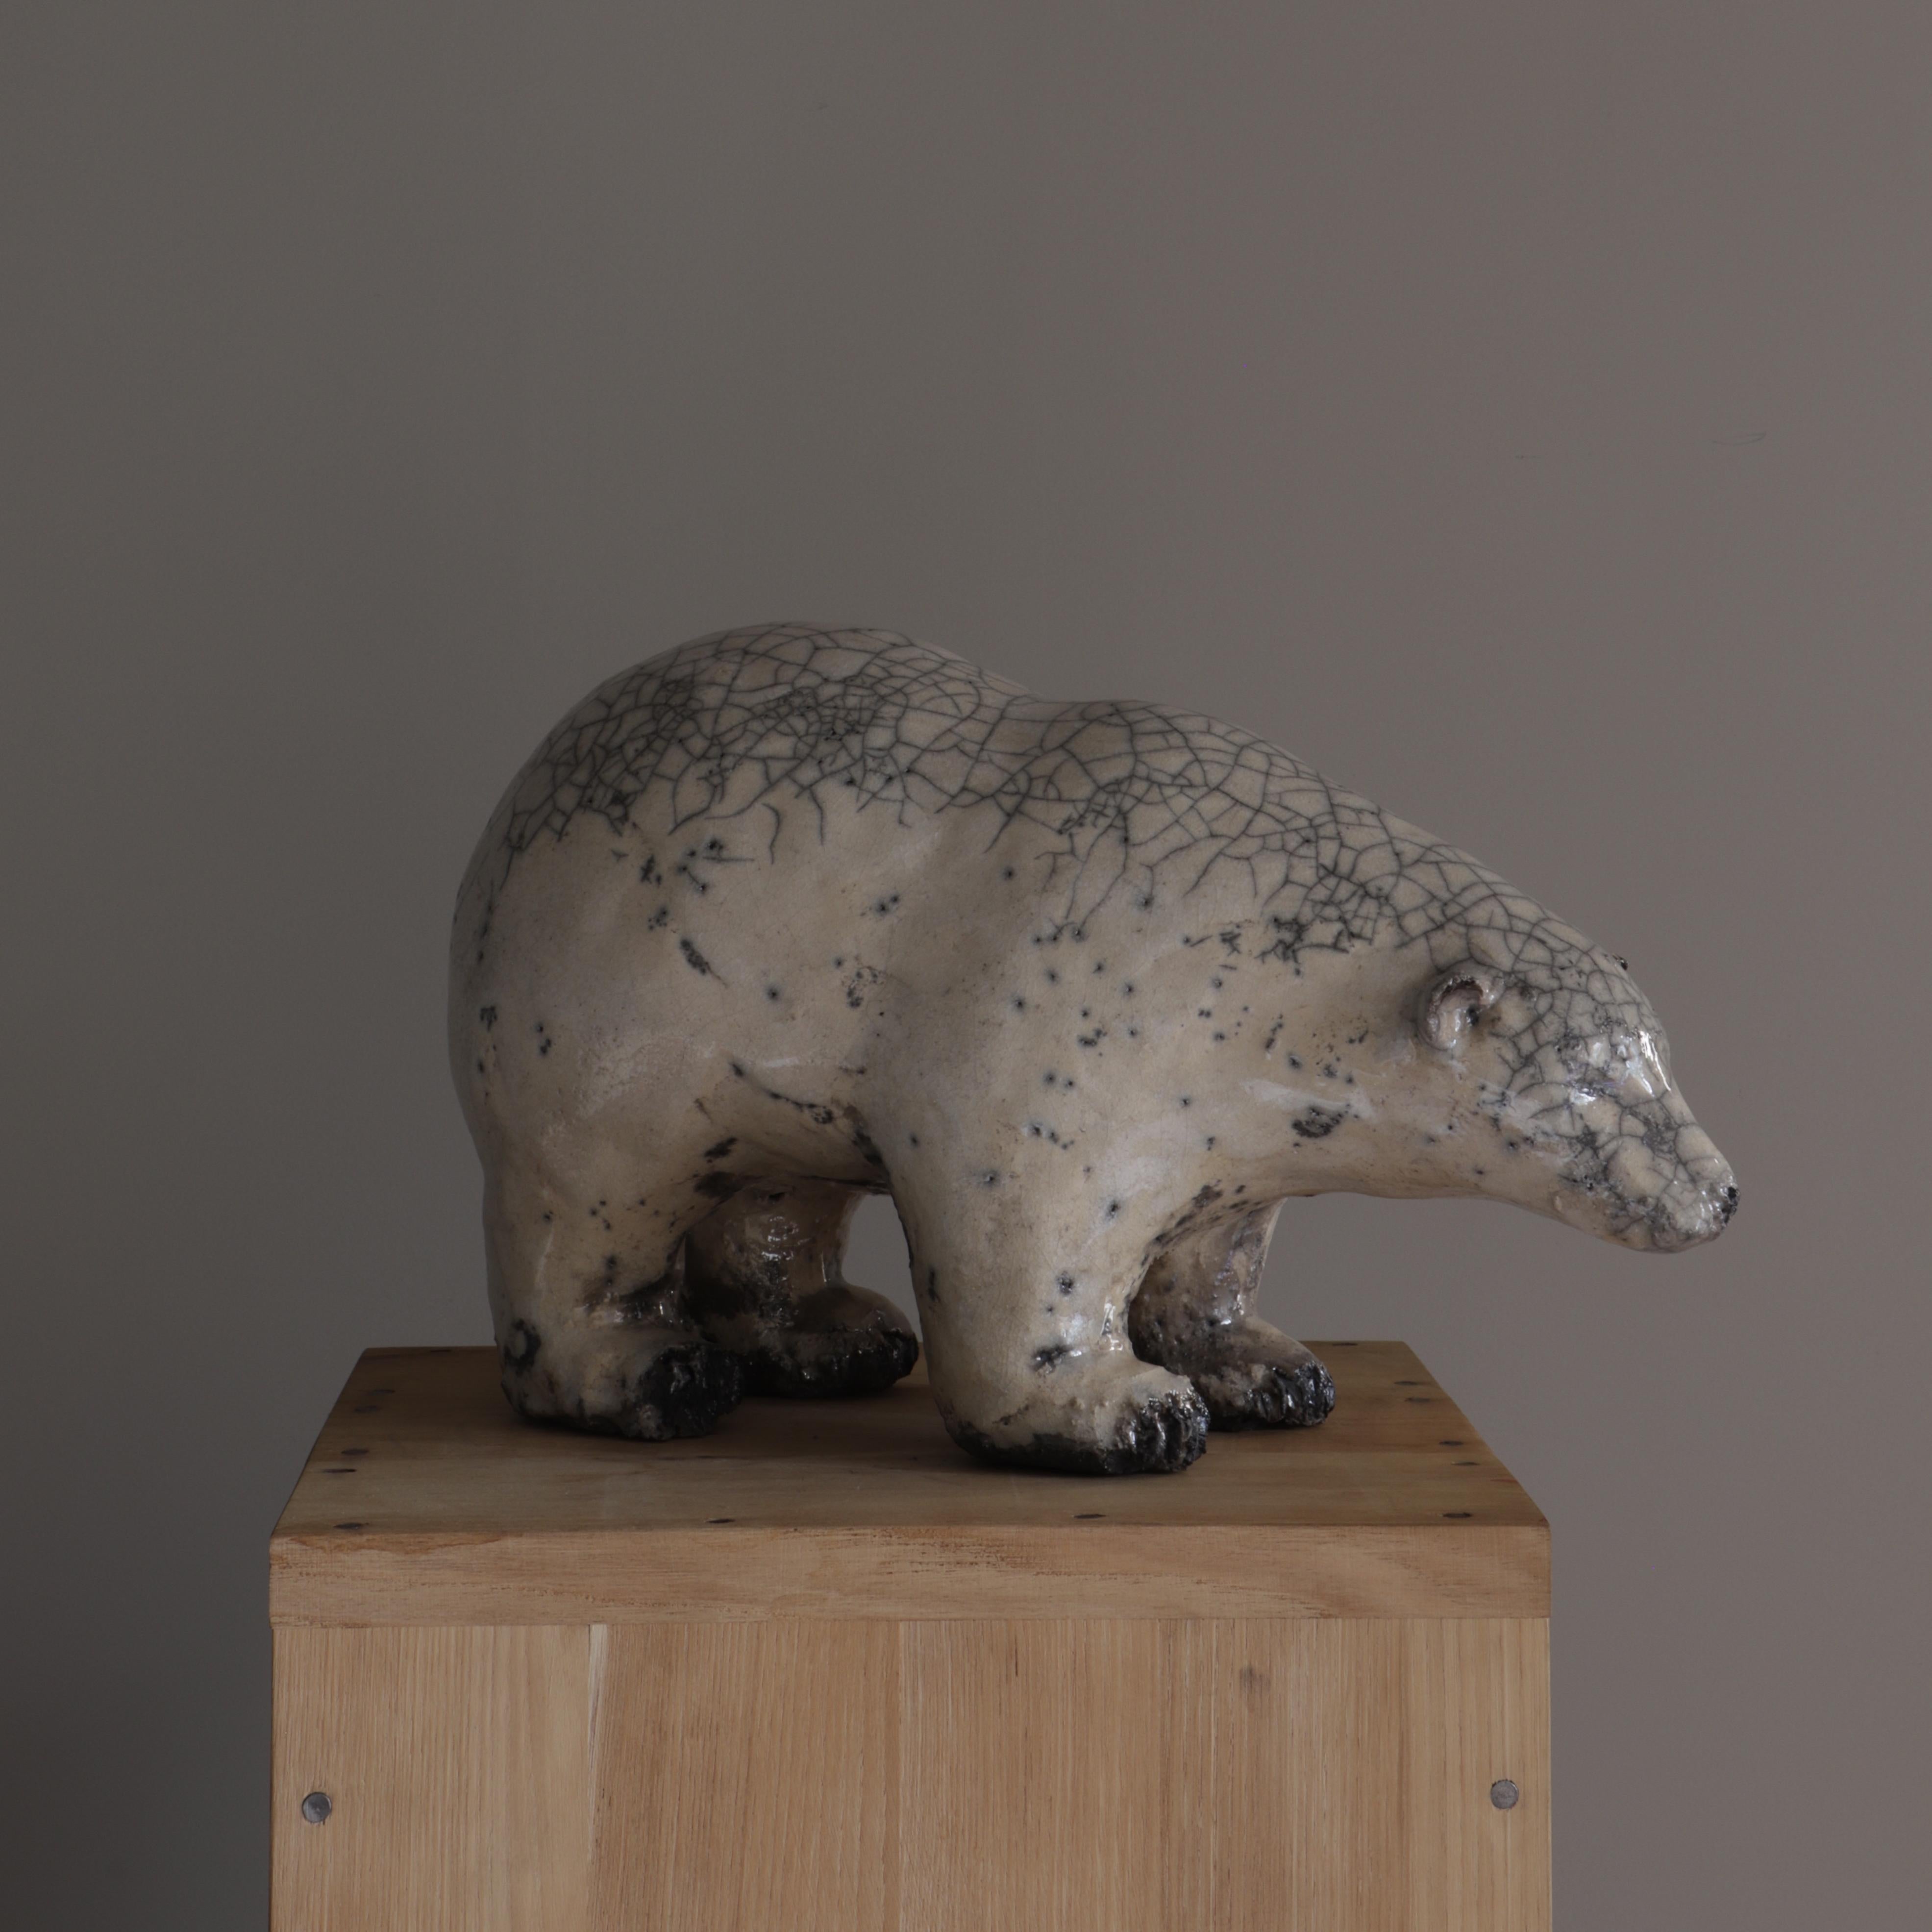 Joanna Hair created this Bear using the Raku technique consisting of smoking the piece in wood chips or sawdust, giving it this cracked aspect.